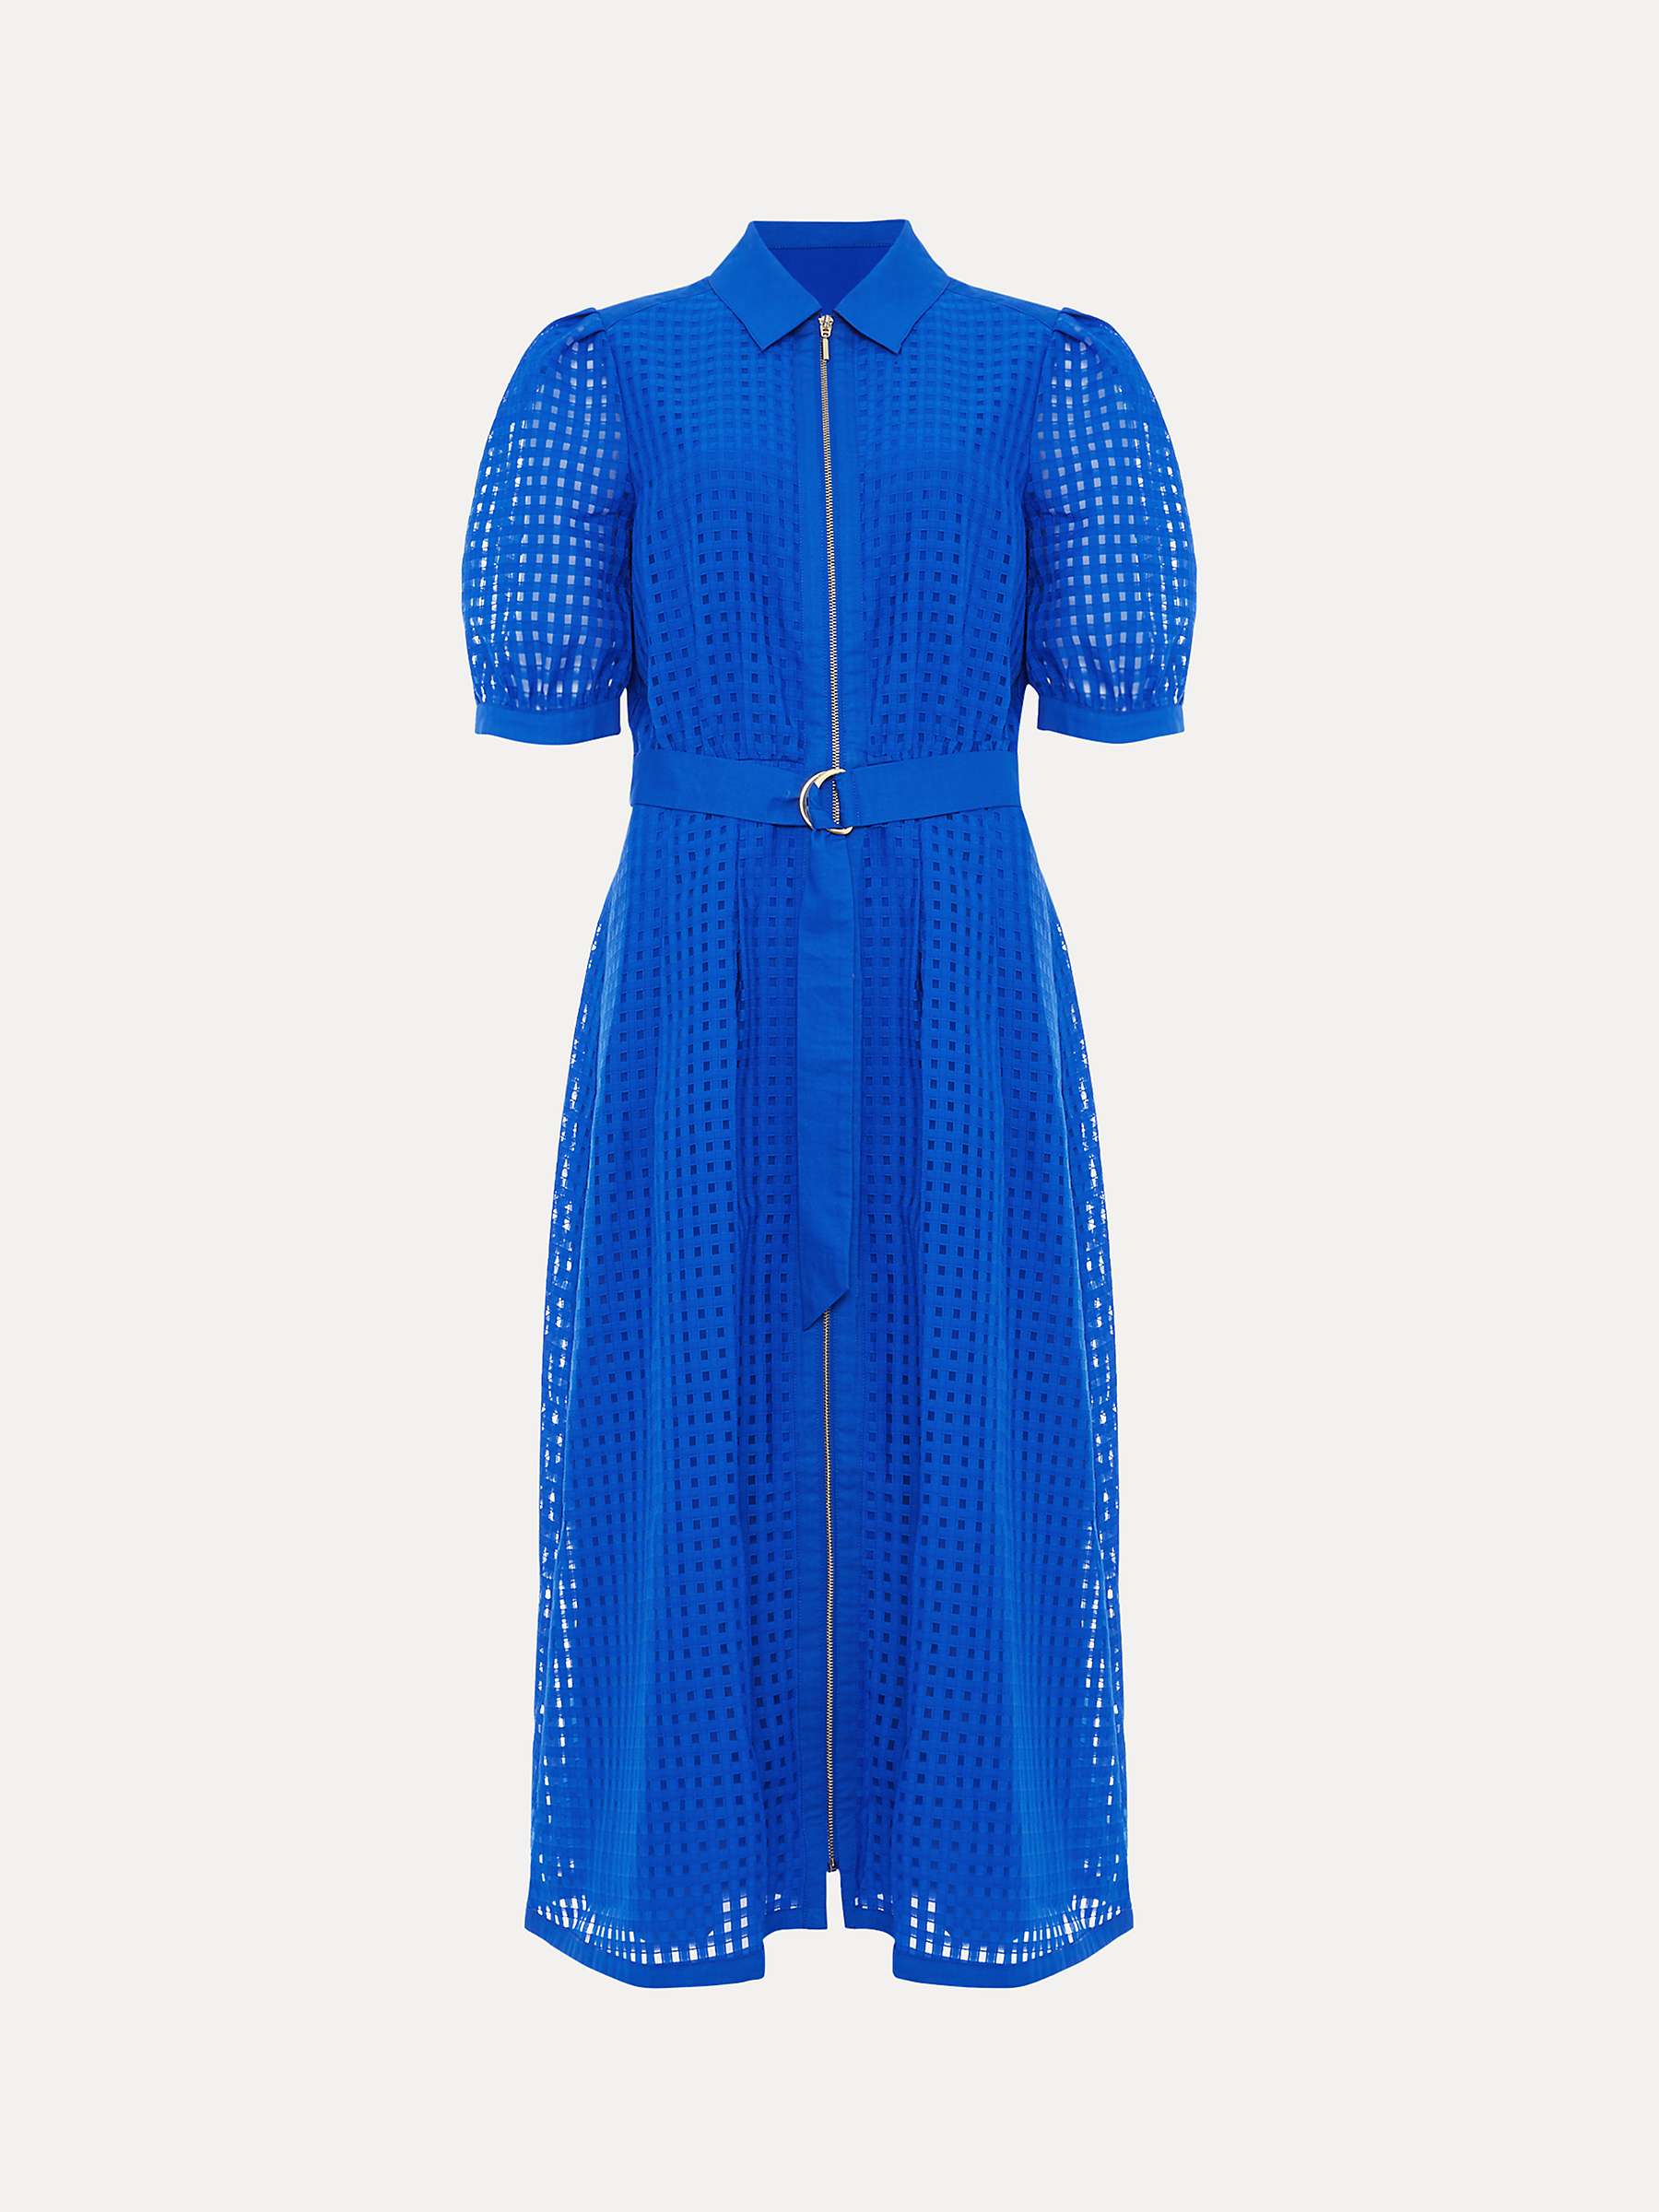 Buy Phase Eight Carey Checked Textured Midi Dress Online at johnlewis.com